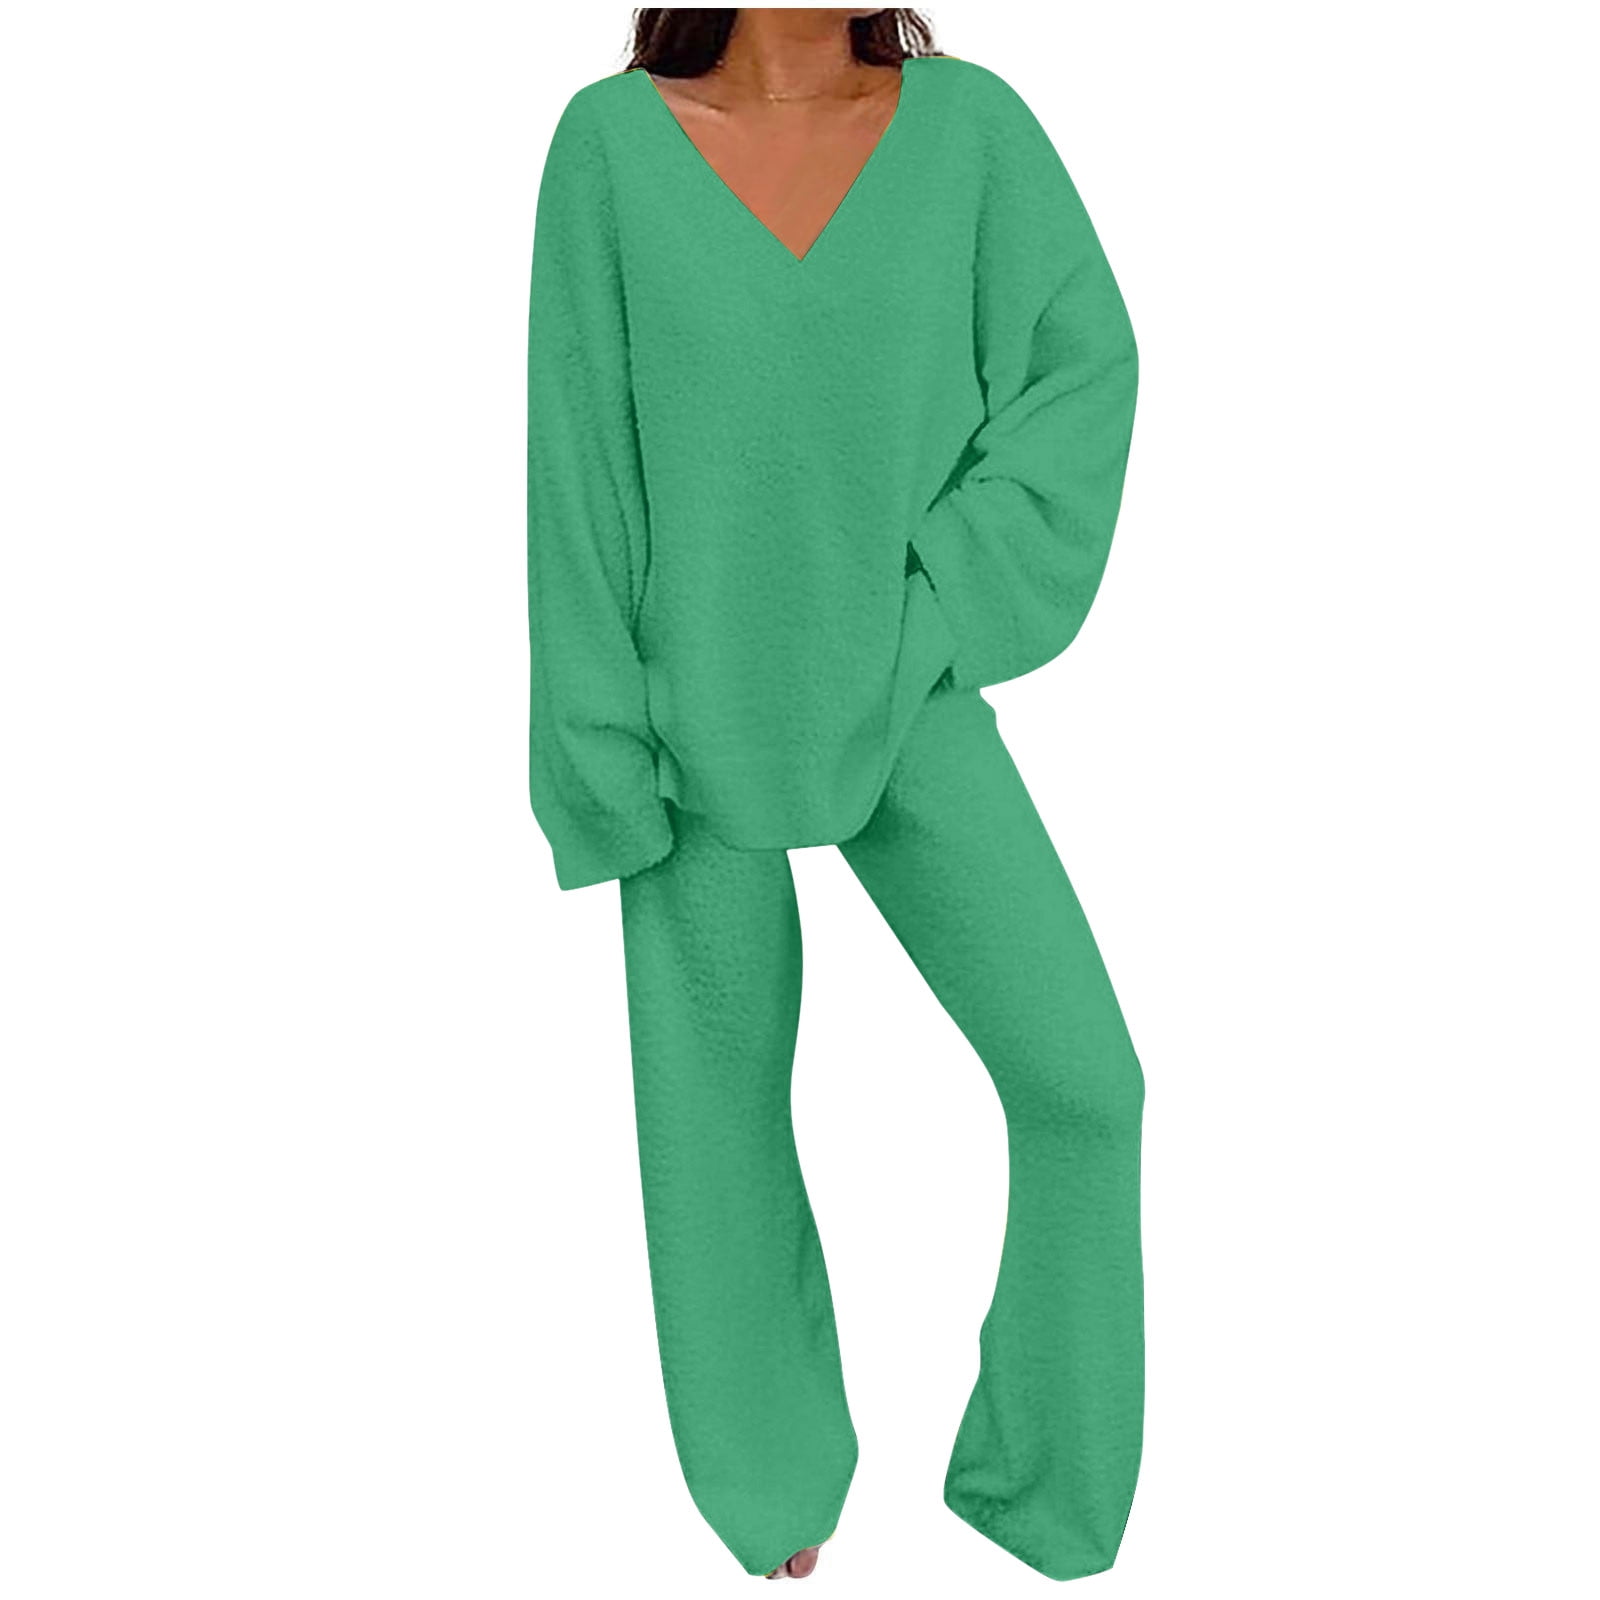 Velvet V Neck Pajama Set For Women Hot And Warm Lunya Sleepwear With Top  And Pants Big Size 201109 From Dou01, $13.43